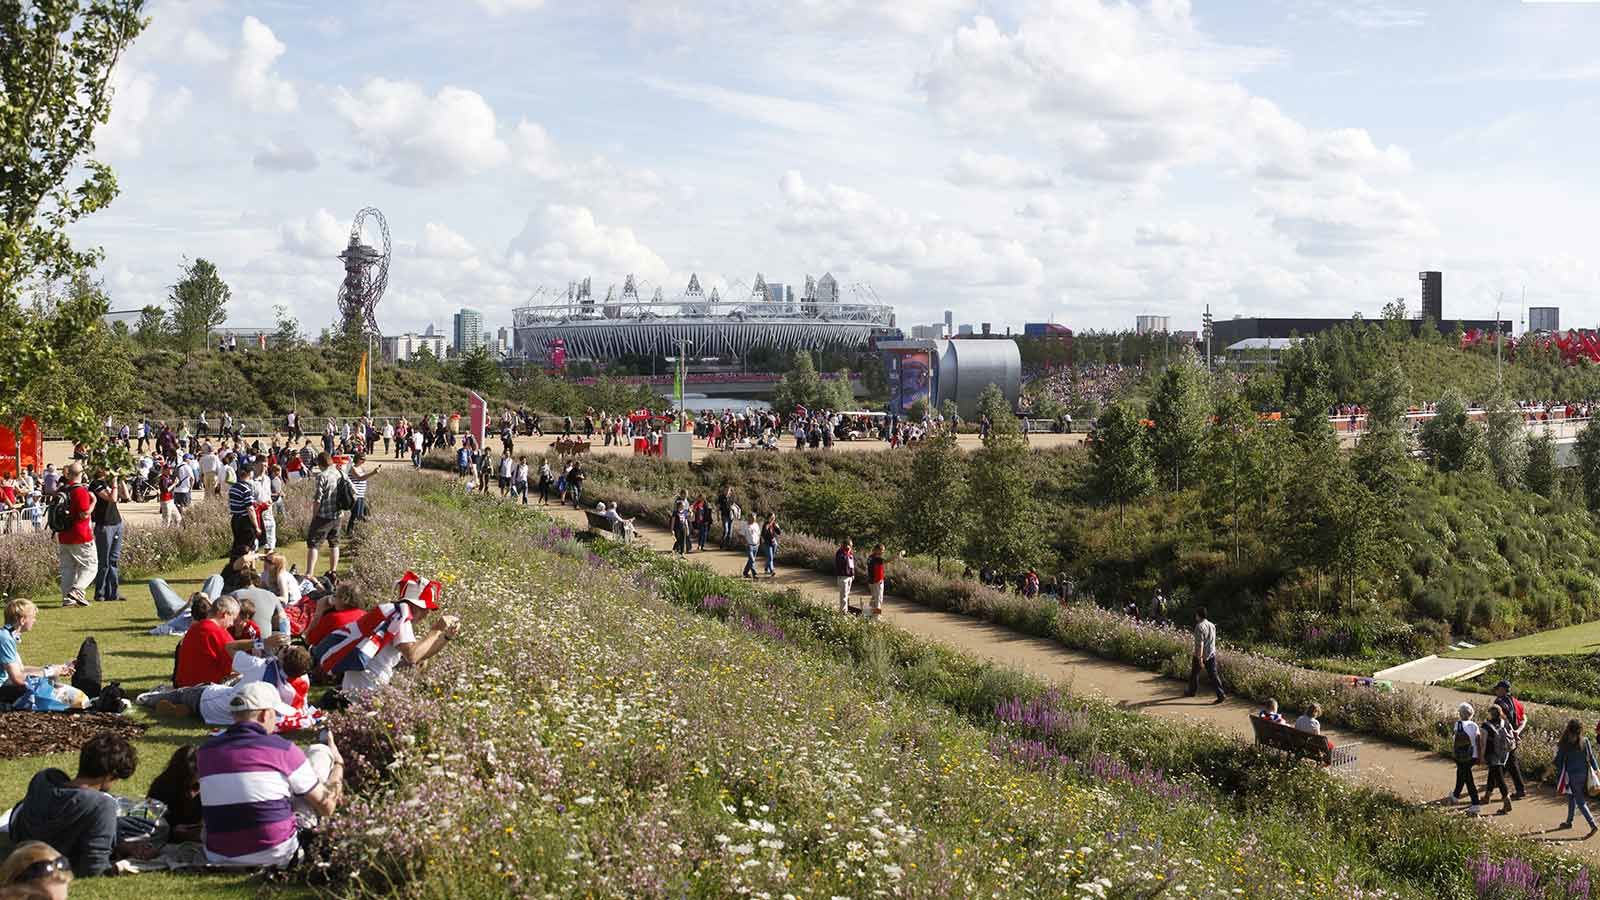 People Sitting at the Queen Elizabeth Olympic Park - Mace Group